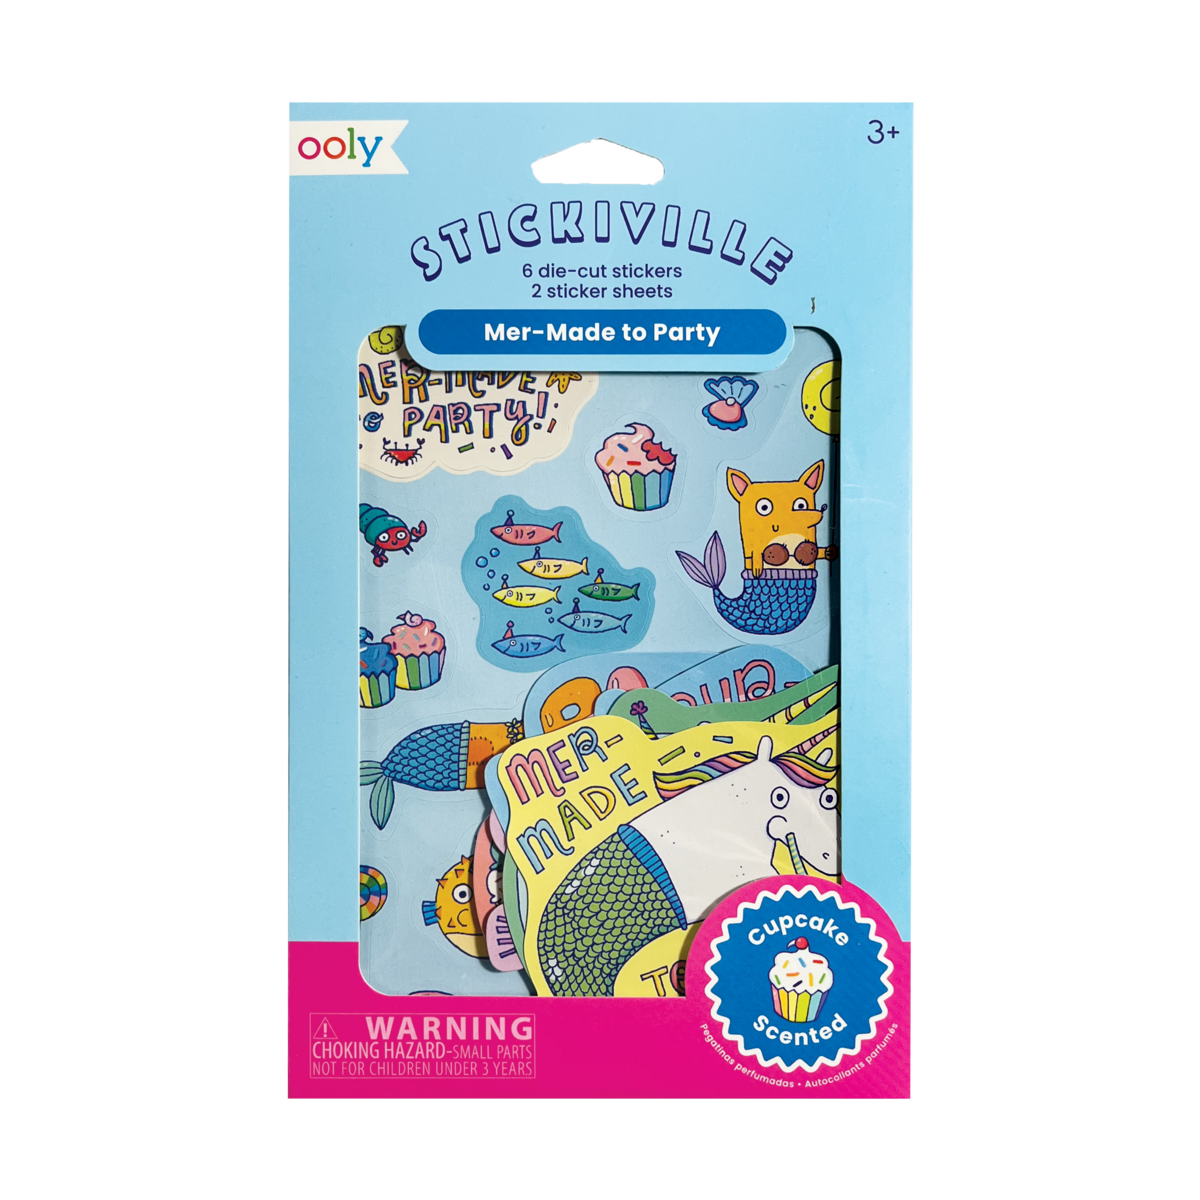 Stickiville Mer-Made to Party die cut sticker sheets in packaging